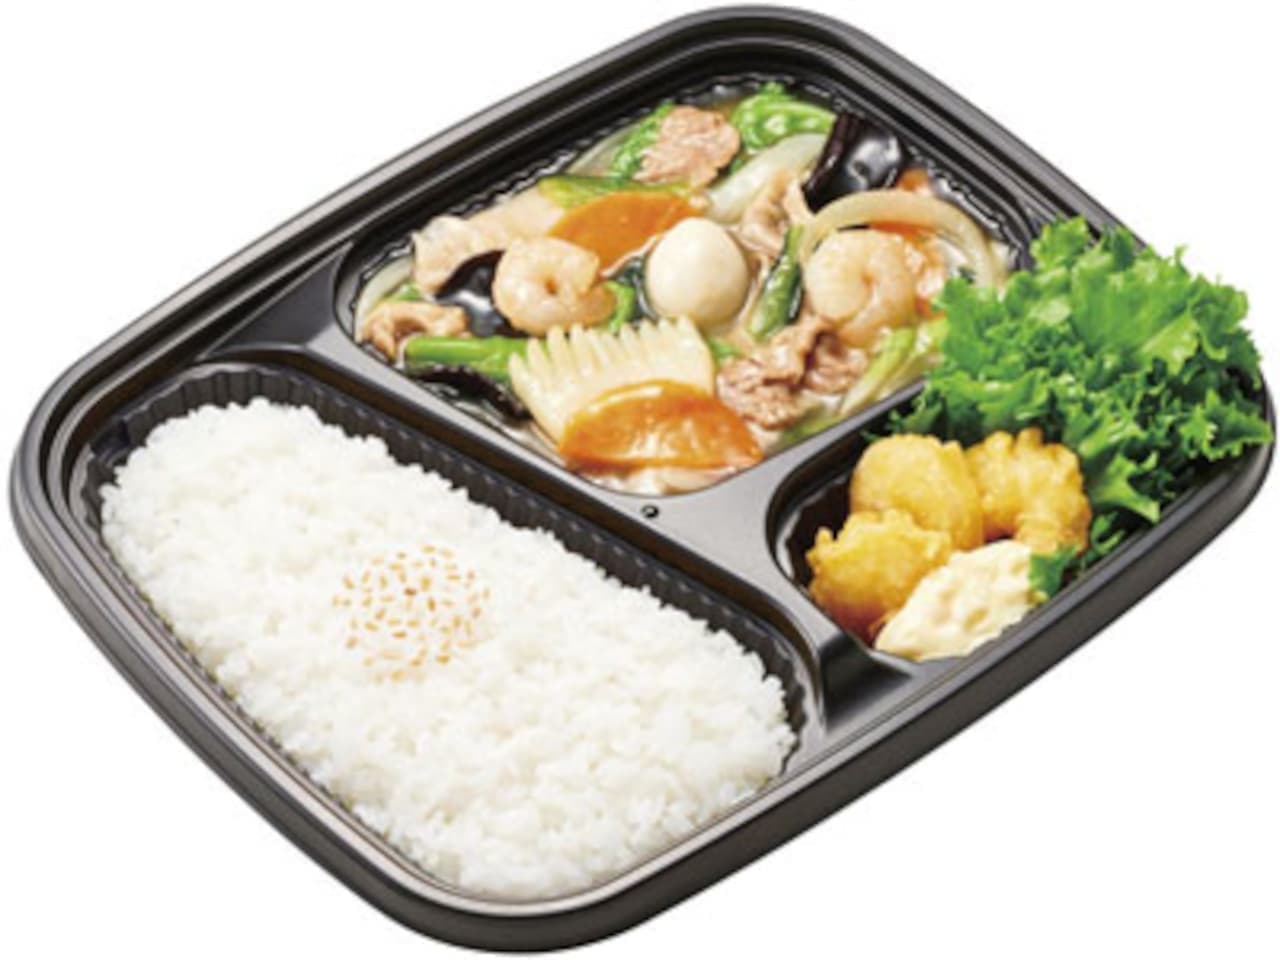 Hokka Hokka Tei "Chukadon" and other bento boxes and side dishes that can take one-third of the amount of vegetables needed per day